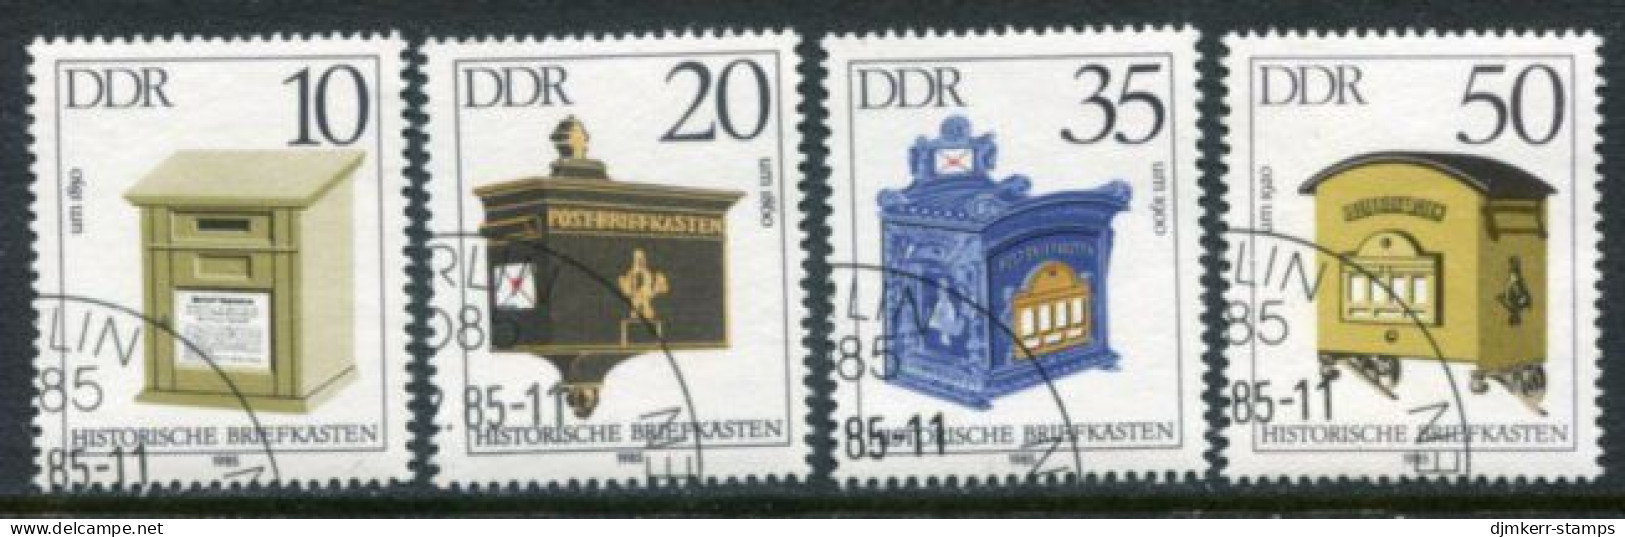 DDR 1985 Histpric Letterboxes Singles Used .  Michel 2924-27 - Gebraucht